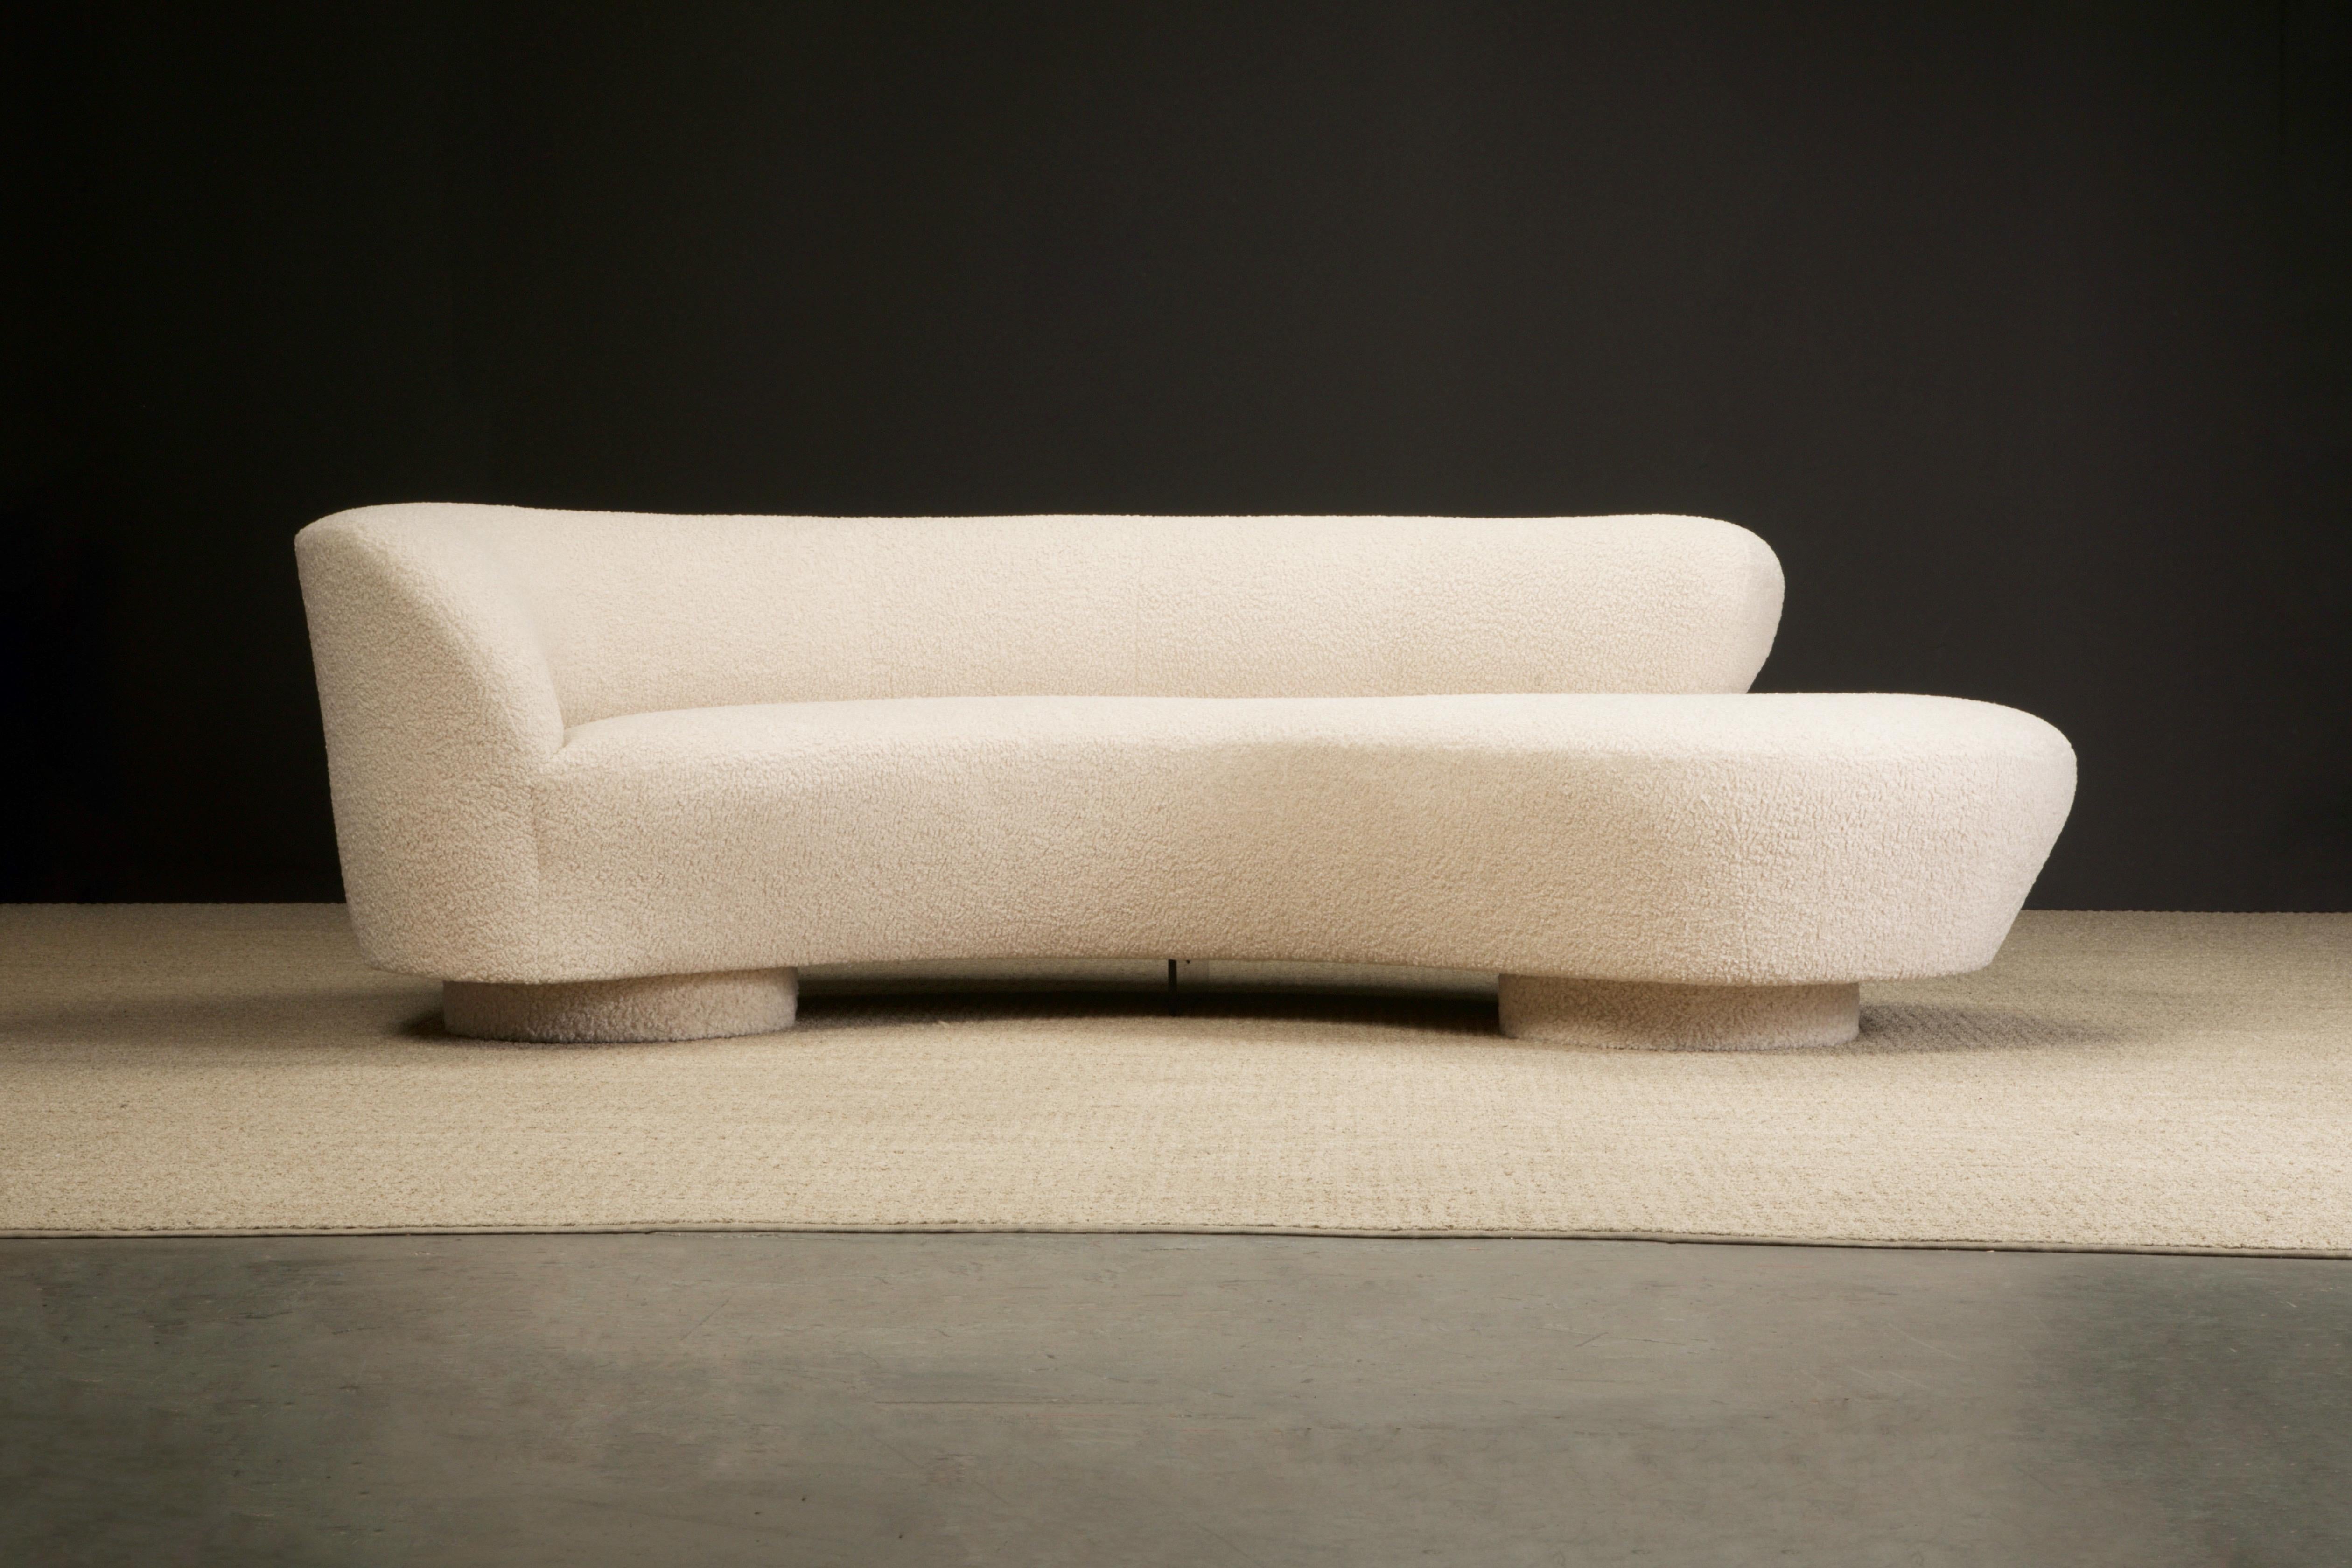 This spectacular Vladimir Kagan 'Cloud' sofa was produced by Directional Furniture in the 1980s and was just newly reupholstered in a gorgeous nubby bouclé fabric, and is signed underneath with Directional label and has the lucite center support